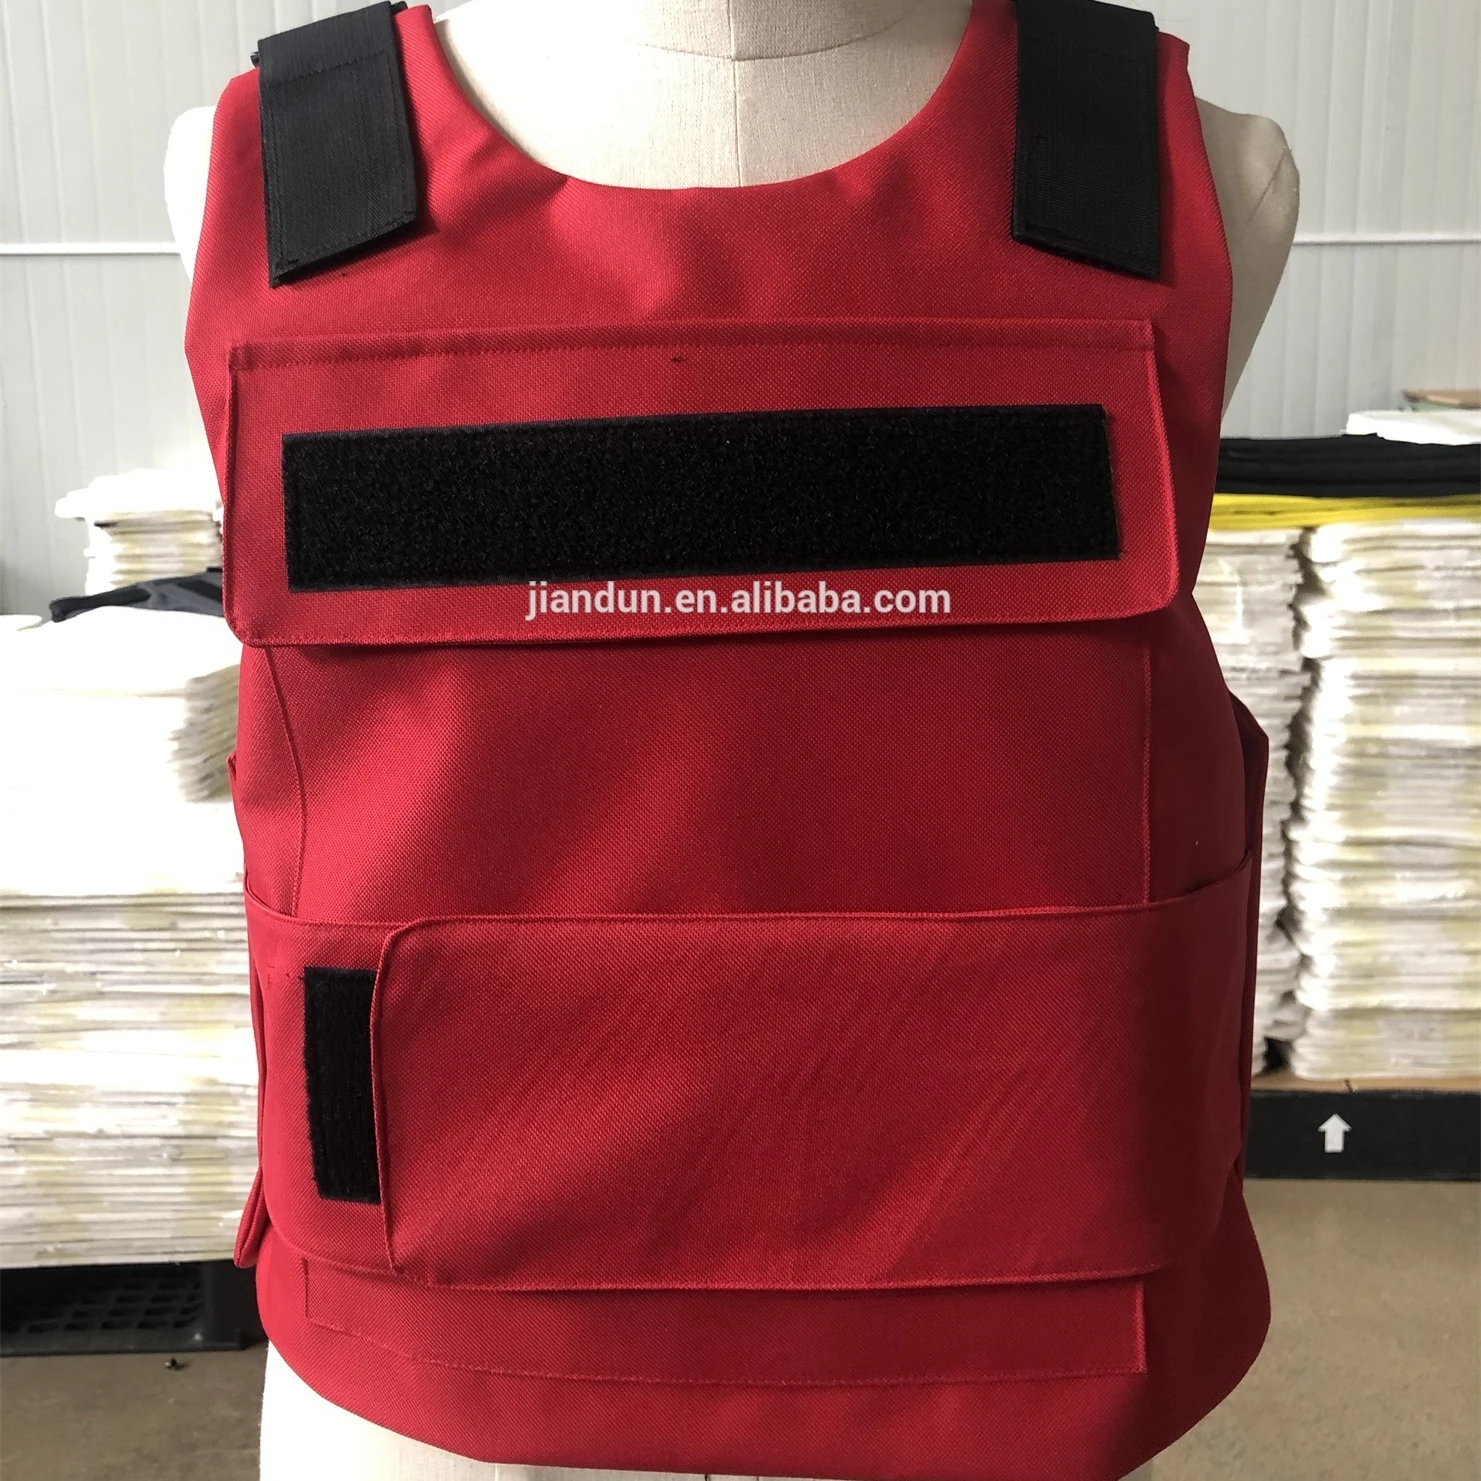 
Customize Fashionable Popular Colorful Tactical Vest, Custom Tactical Vest Outdoor Training Hunting Airsoft Tactical Vest 